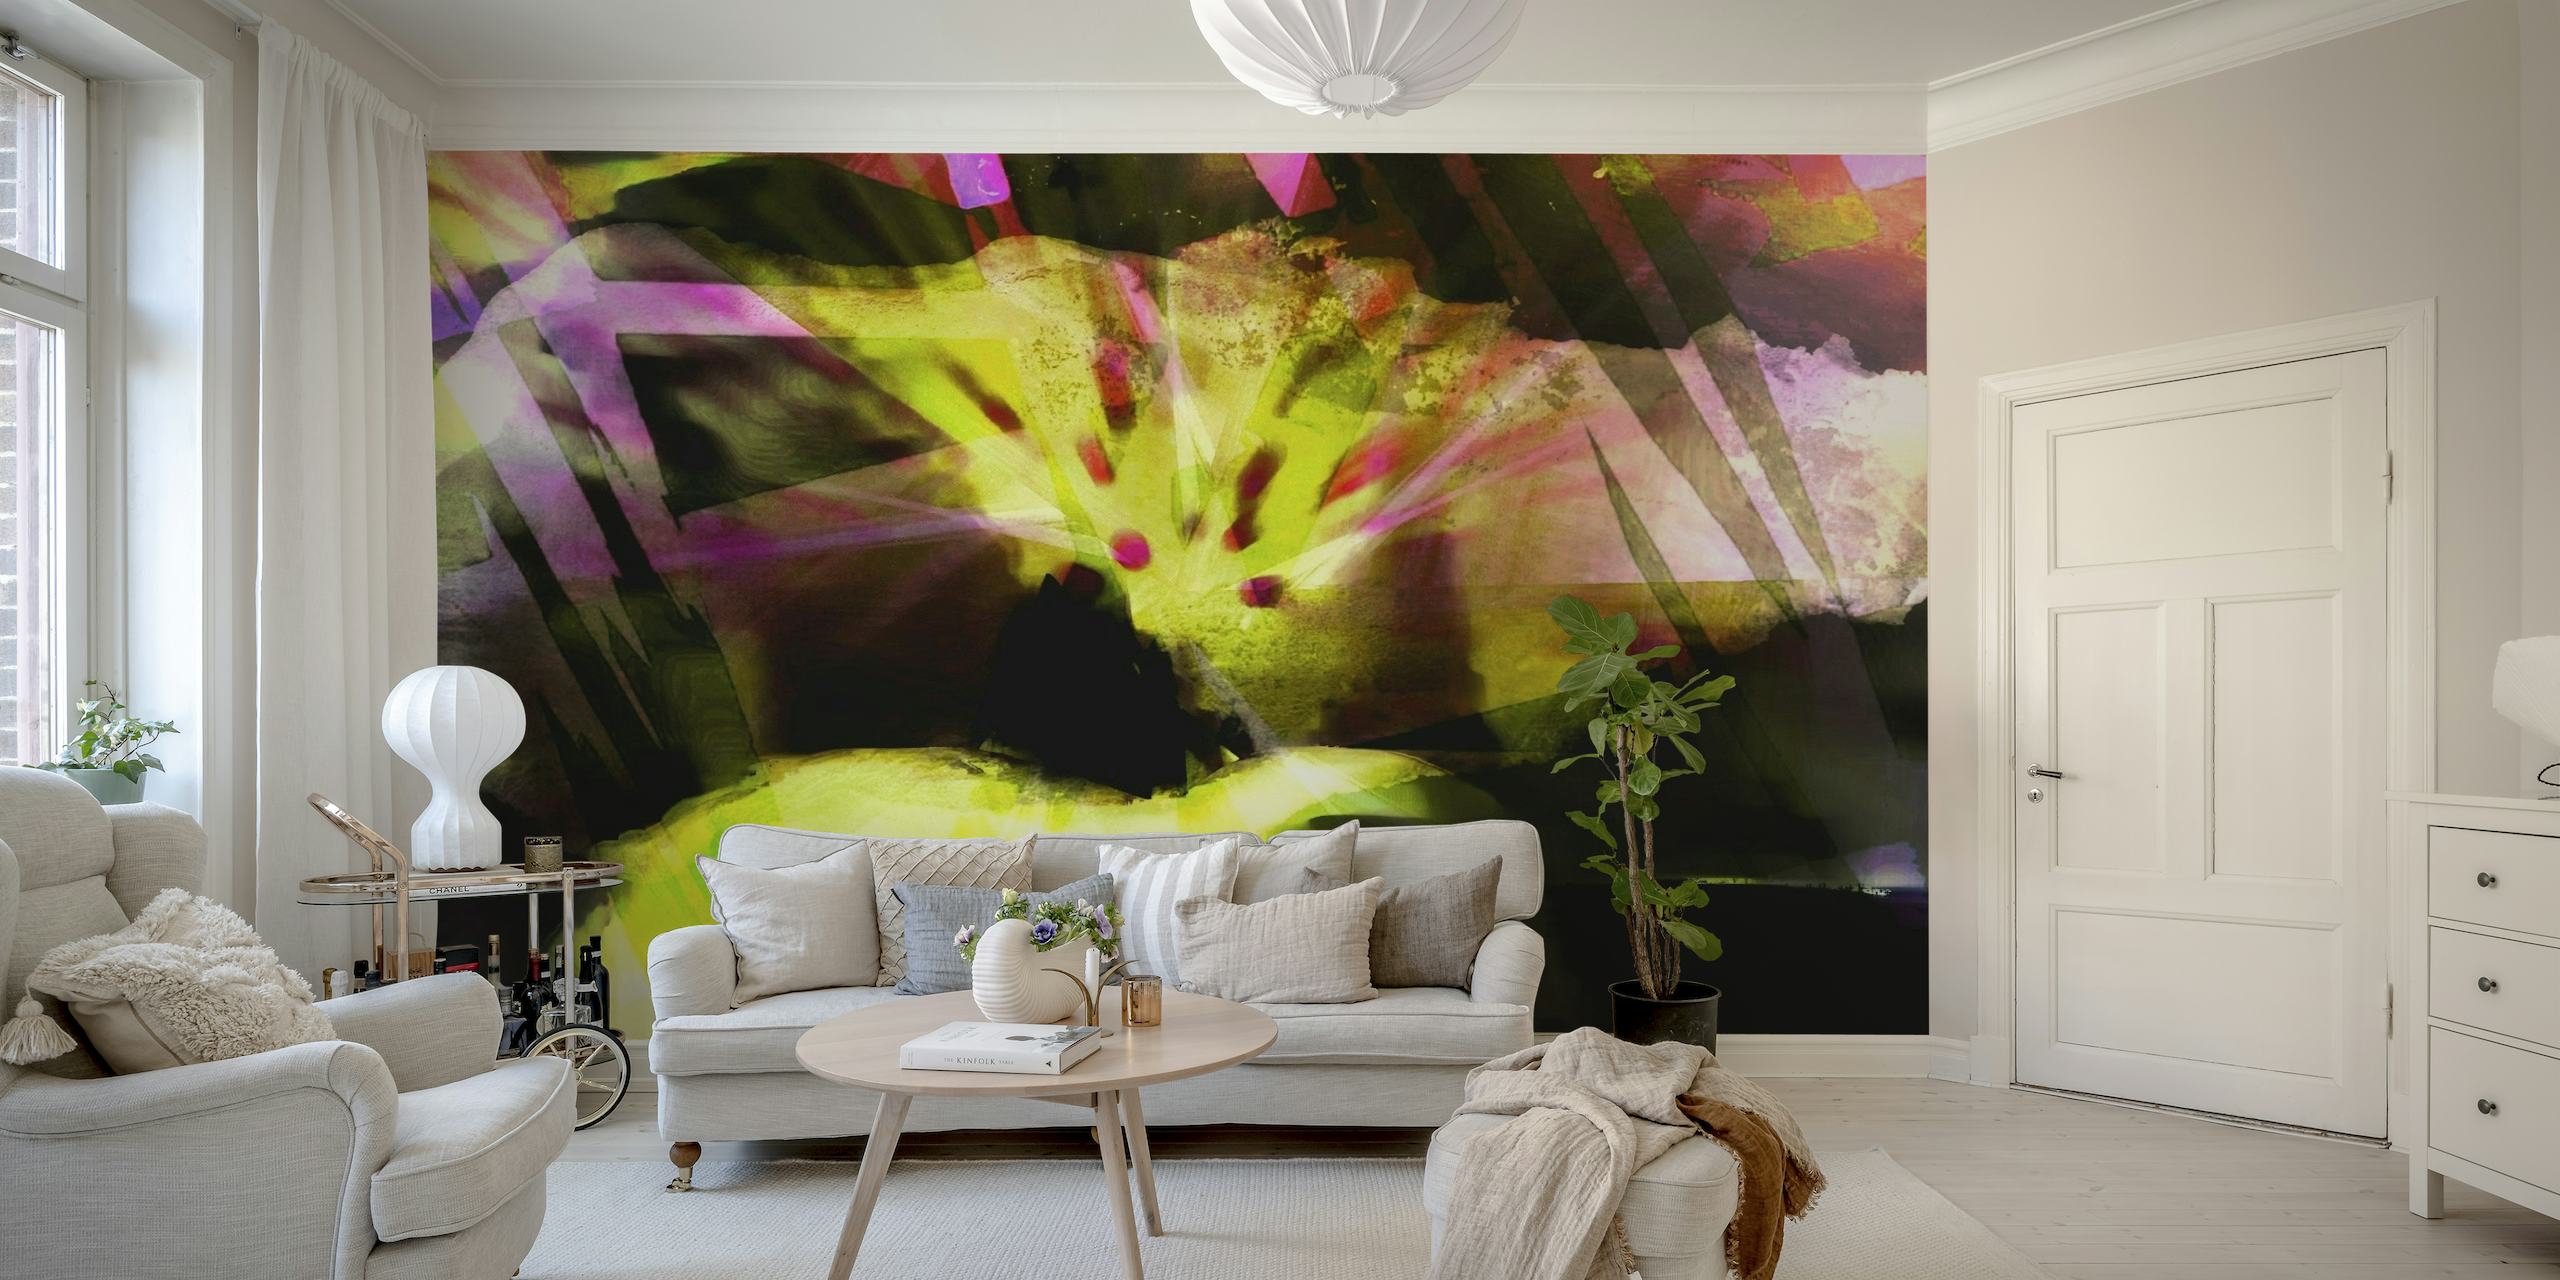 Abstract fruit slices wall mural with vibrant colors